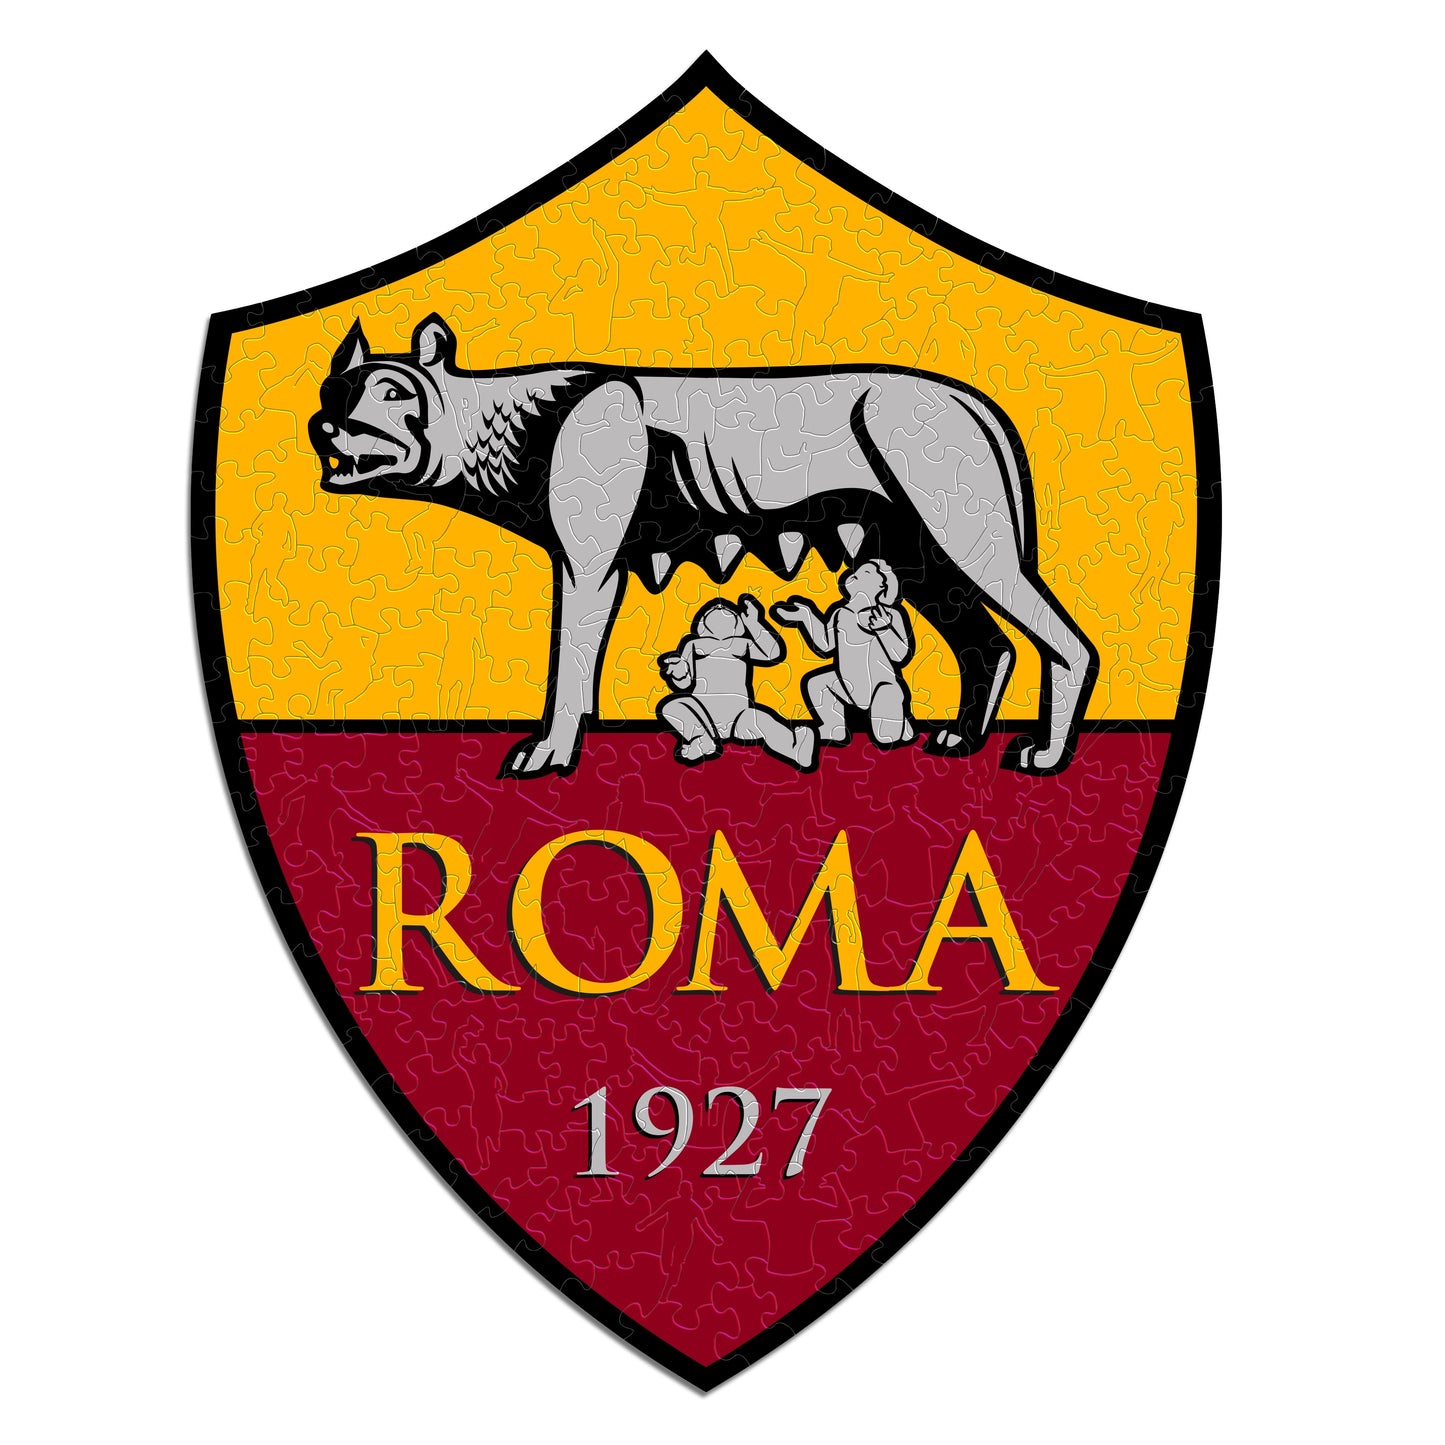 AS Roma® Crest - Official Wooden Puzzle